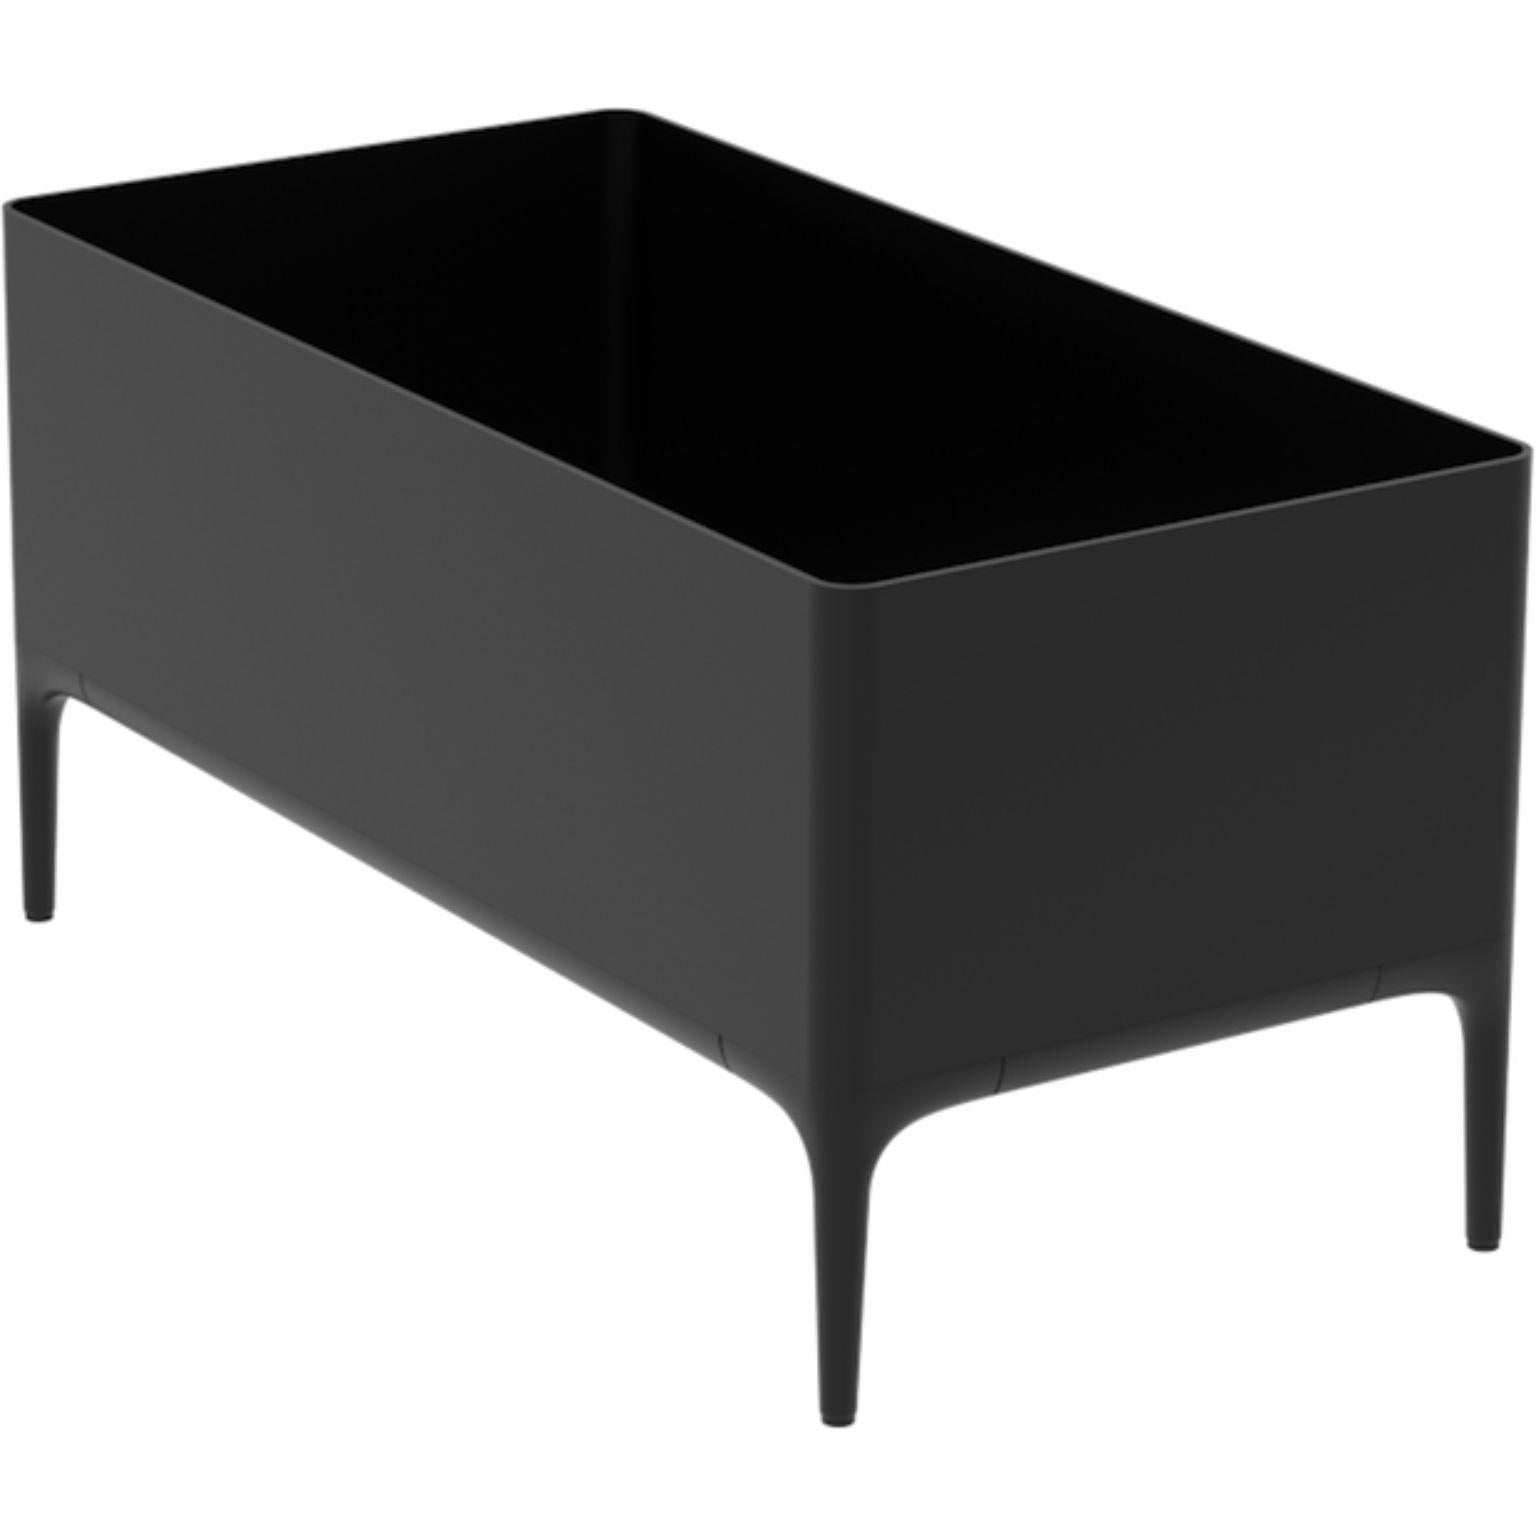 Xaloc black planter by MOWEE
Dimensions: D90 x W45 x H45 cm
Material: Aluminium
Weight: 11 kg
Also available in different colours and finishes. 

 Xaloc synthesizes the lines of interior furniture to extrapolate to the exterior, creating an